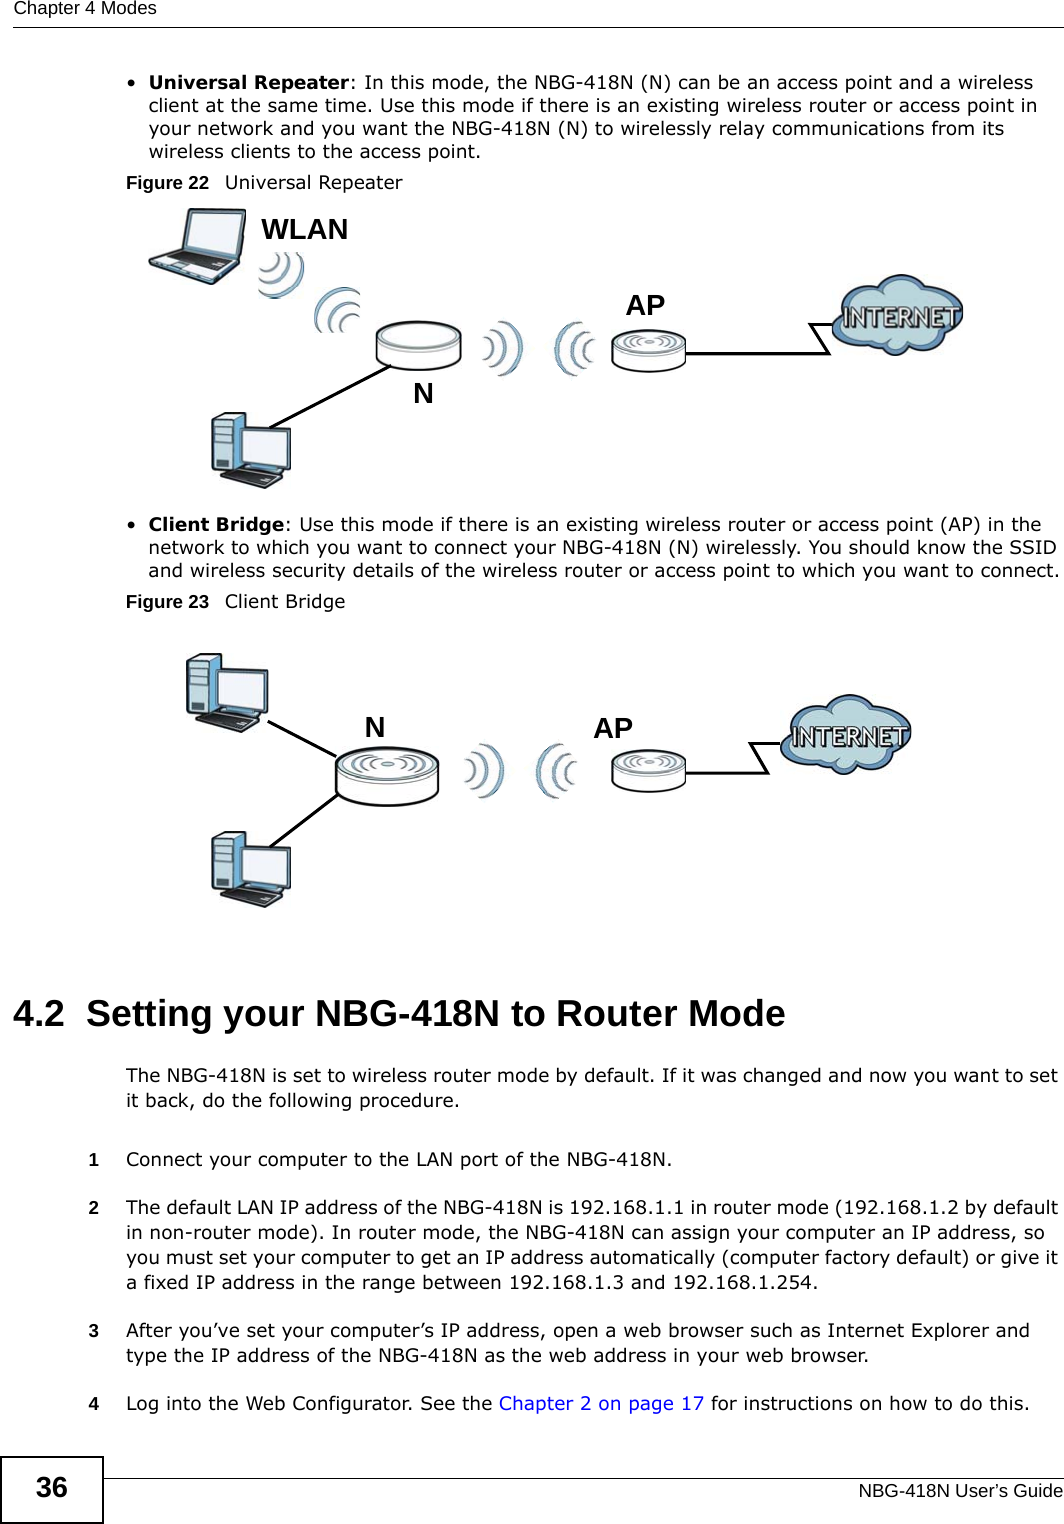 Chapter 4 ModesNBG-418N User’s Guide36•Universal Repeater: In this mode, the NBG-418N (N) can be an access point and a wireless client at the same time. Use this mode if there is an existing wireless router or access point in your network and you want the NBG-418N (N) to wirelessly relay communications from its wireless clients to the access point.Figure 22   Universal Repeater •Client Bridge: Use this mode if there is an existing wireless router or access point (AP) in the network to which you want to connect your NBG-418N (N) wirelessly. You should know the SSID and wireless security details of the wireless router or access point to which you want to connect.Figure 23   Client Bridge4.2  Setting your NBG-418N to Router ModeThe NBG-418N is set to wireless router mode by default. If it was changed and now you want to set it back, do the following procedure.1Connect your computer to the LAN port of the NBG-418N. 2The default LAN IP address of the NBG-418N is 192.168.1.1 in router mode (192.168.1.2 by default in non-router mode). In router mode, the NBG-418N can assign your computer an IP address, so you must set your computer to get an IP address automatically (computer factory default) or give it a fixed IP address in the range between 192.168.1.3 and 192.168.1.254.3After you’ve set your computer’s IP address, open a web browser such as Internet Explorer and type the IP address of the NBG-418N as the web address in your web browser.4Log into the Web Configurator. See the Chapter 2 on page 17 for instructions on how to do this.LEWNAPWLANLEWNAP